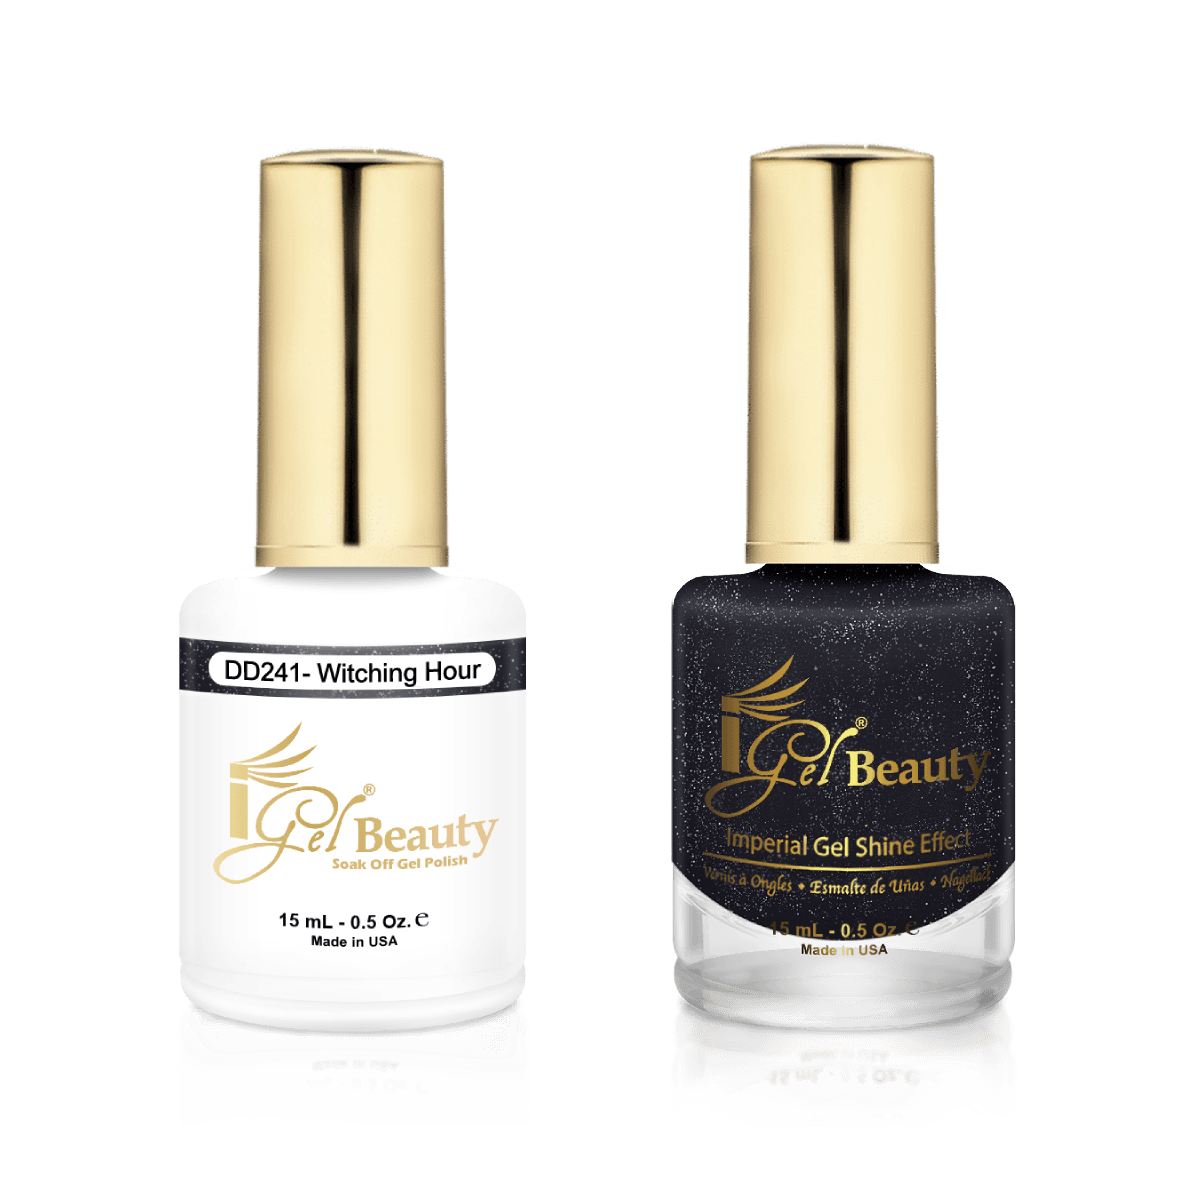 IGel Duo Gel Polish + Matching Nail Lacquer DD 241 WITCHING HOUR